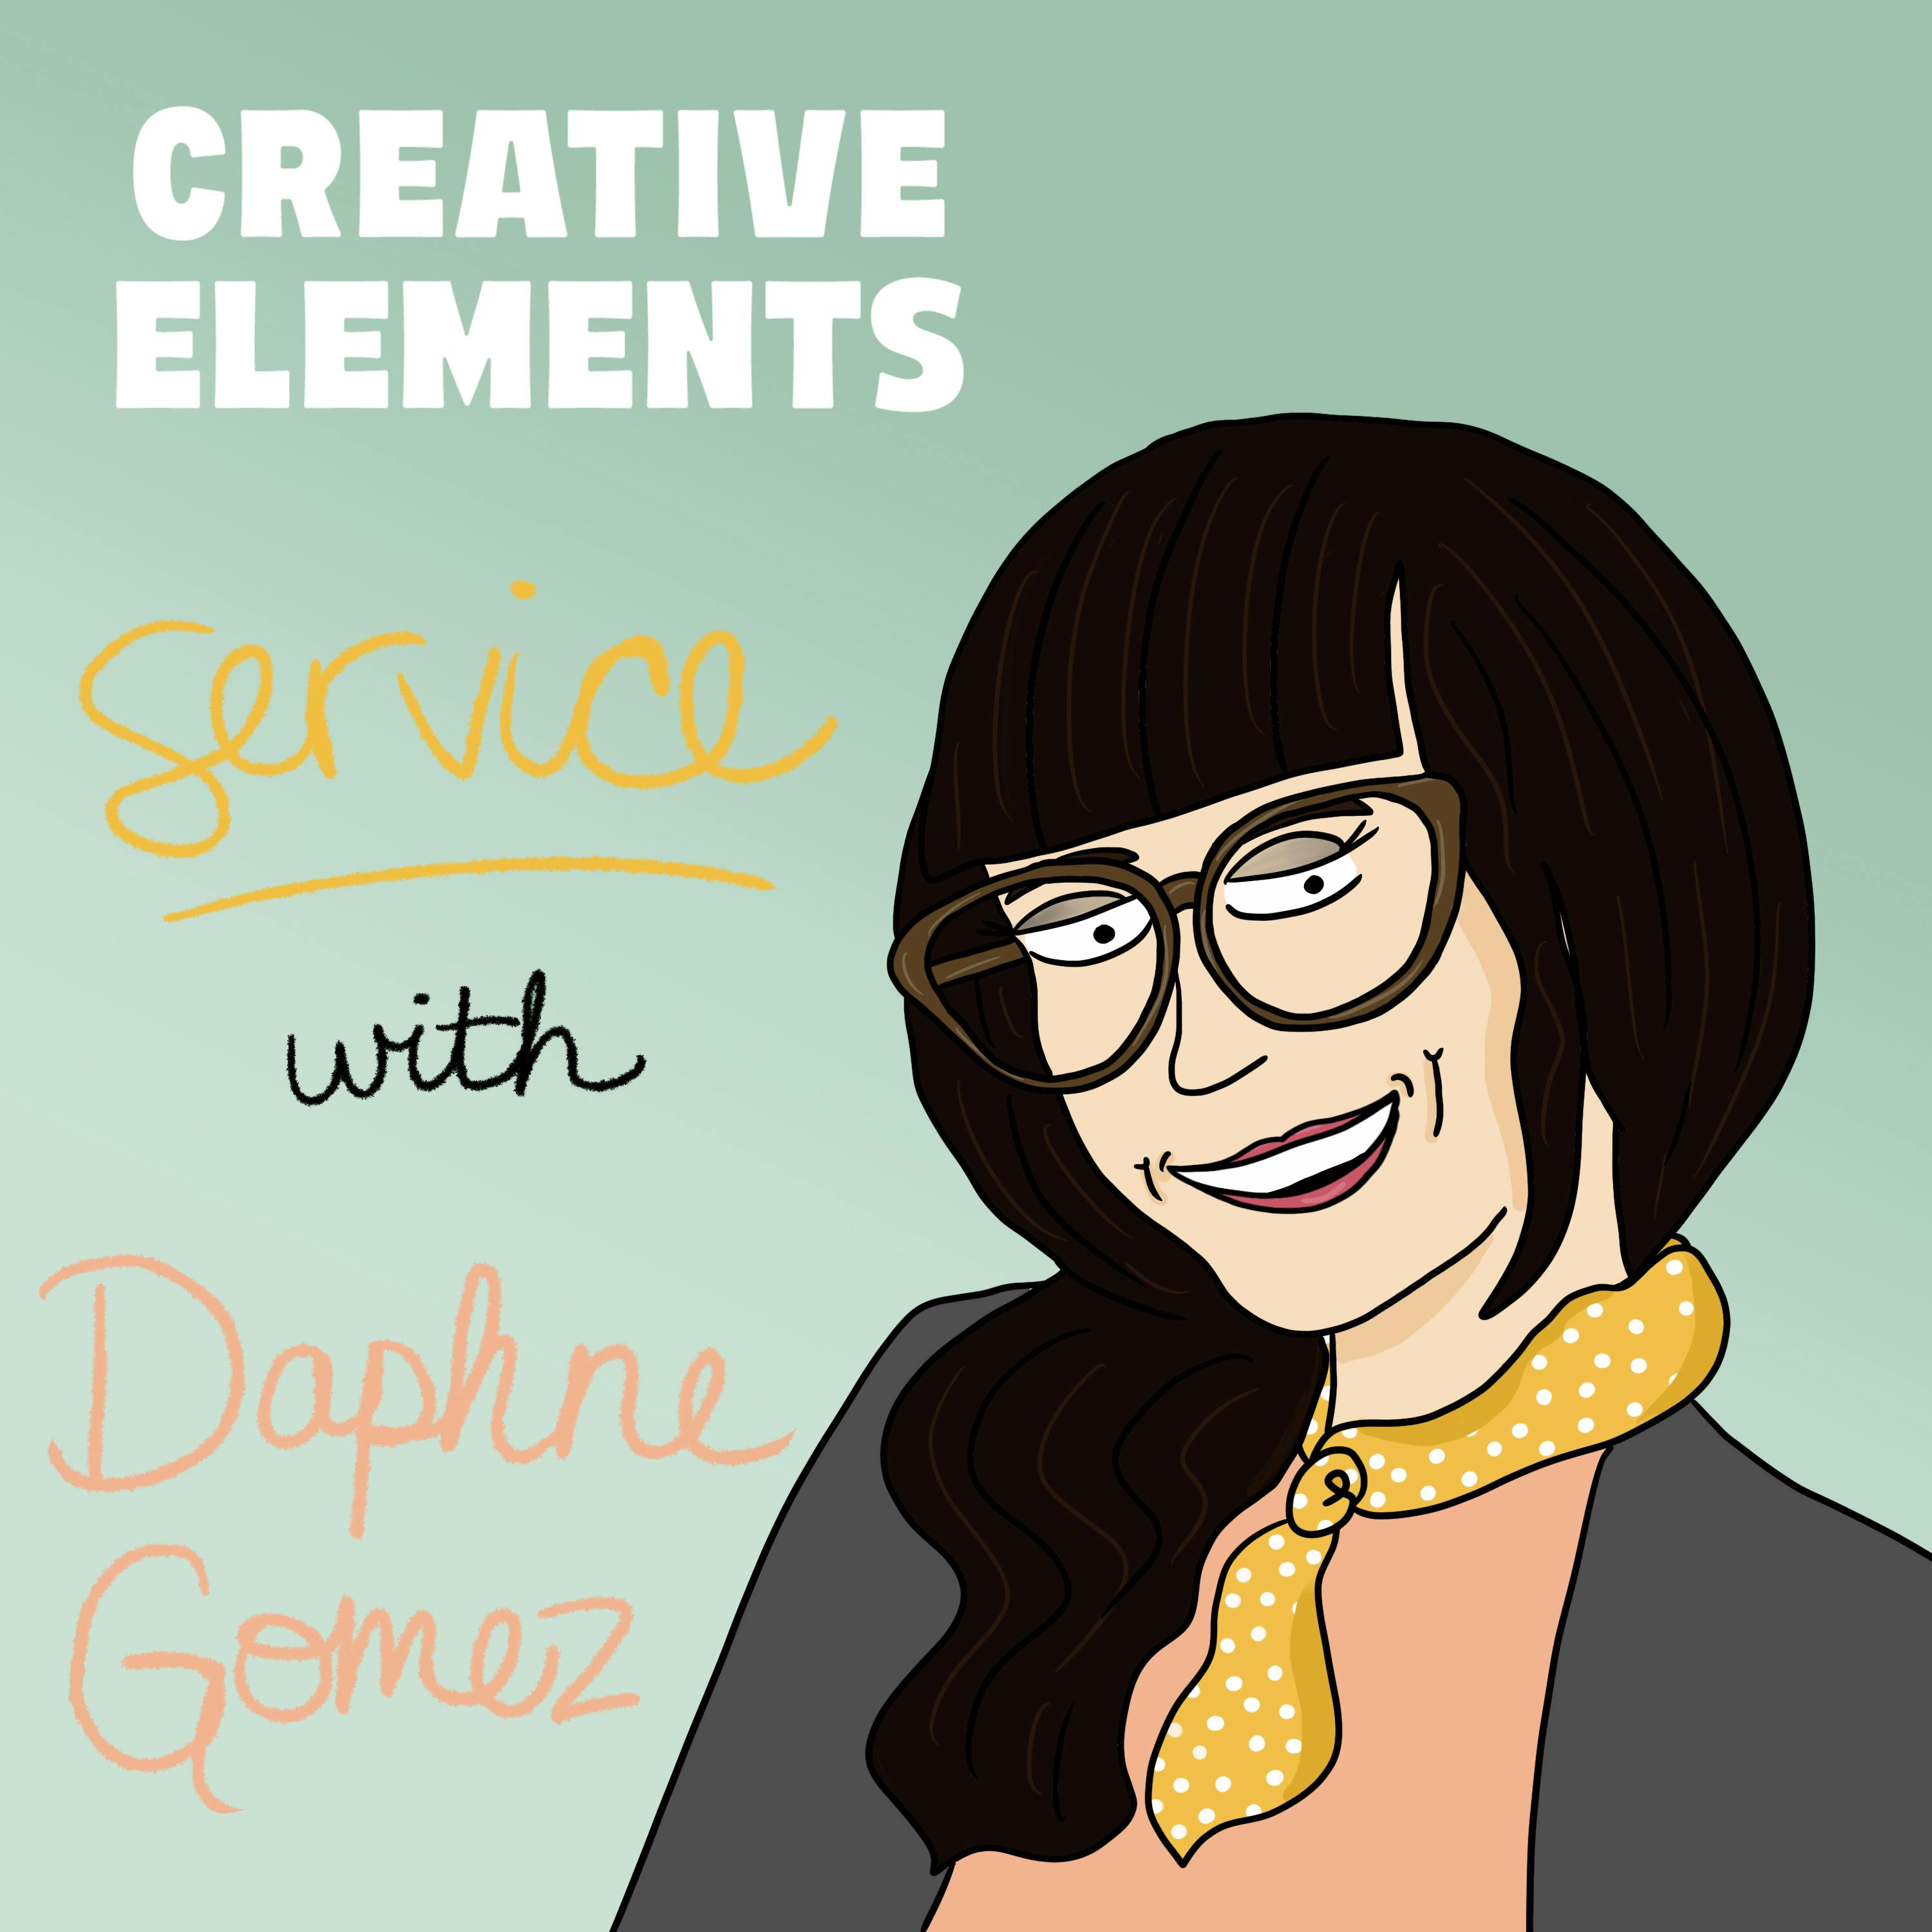 #105: Daphne Gomez [Service] – Leaning into rapid growth and finding rapid growth on Instagram Image